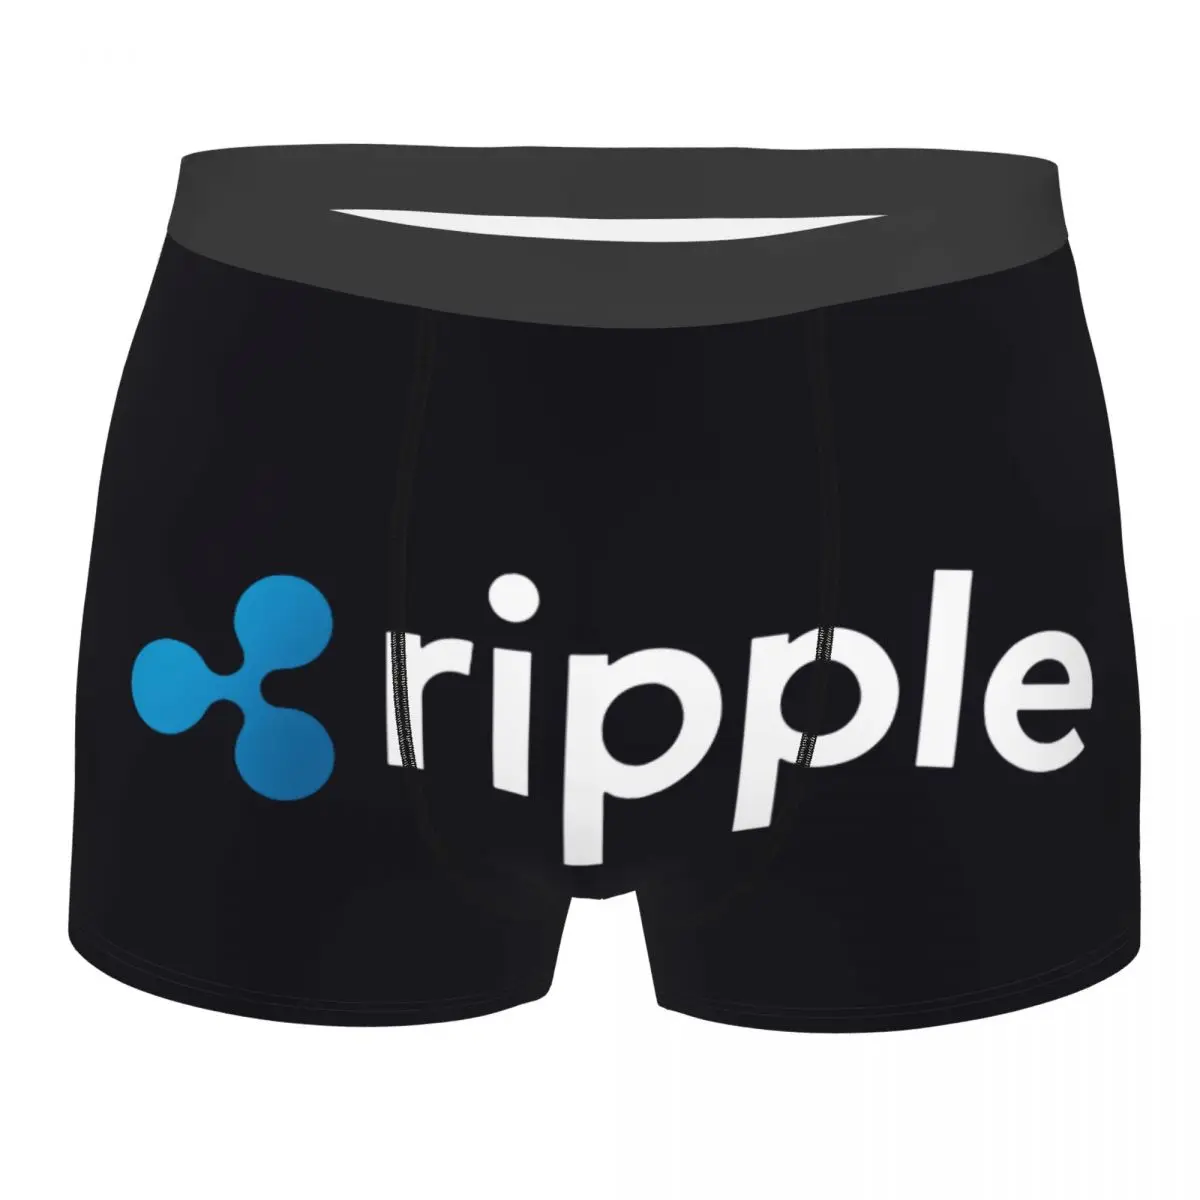 

Ripple XRP Crypto Cryptocurrency Men's Underwear Block Chain Money Boxer Briefs Shorts Panties Underpants for Homme S-XXL